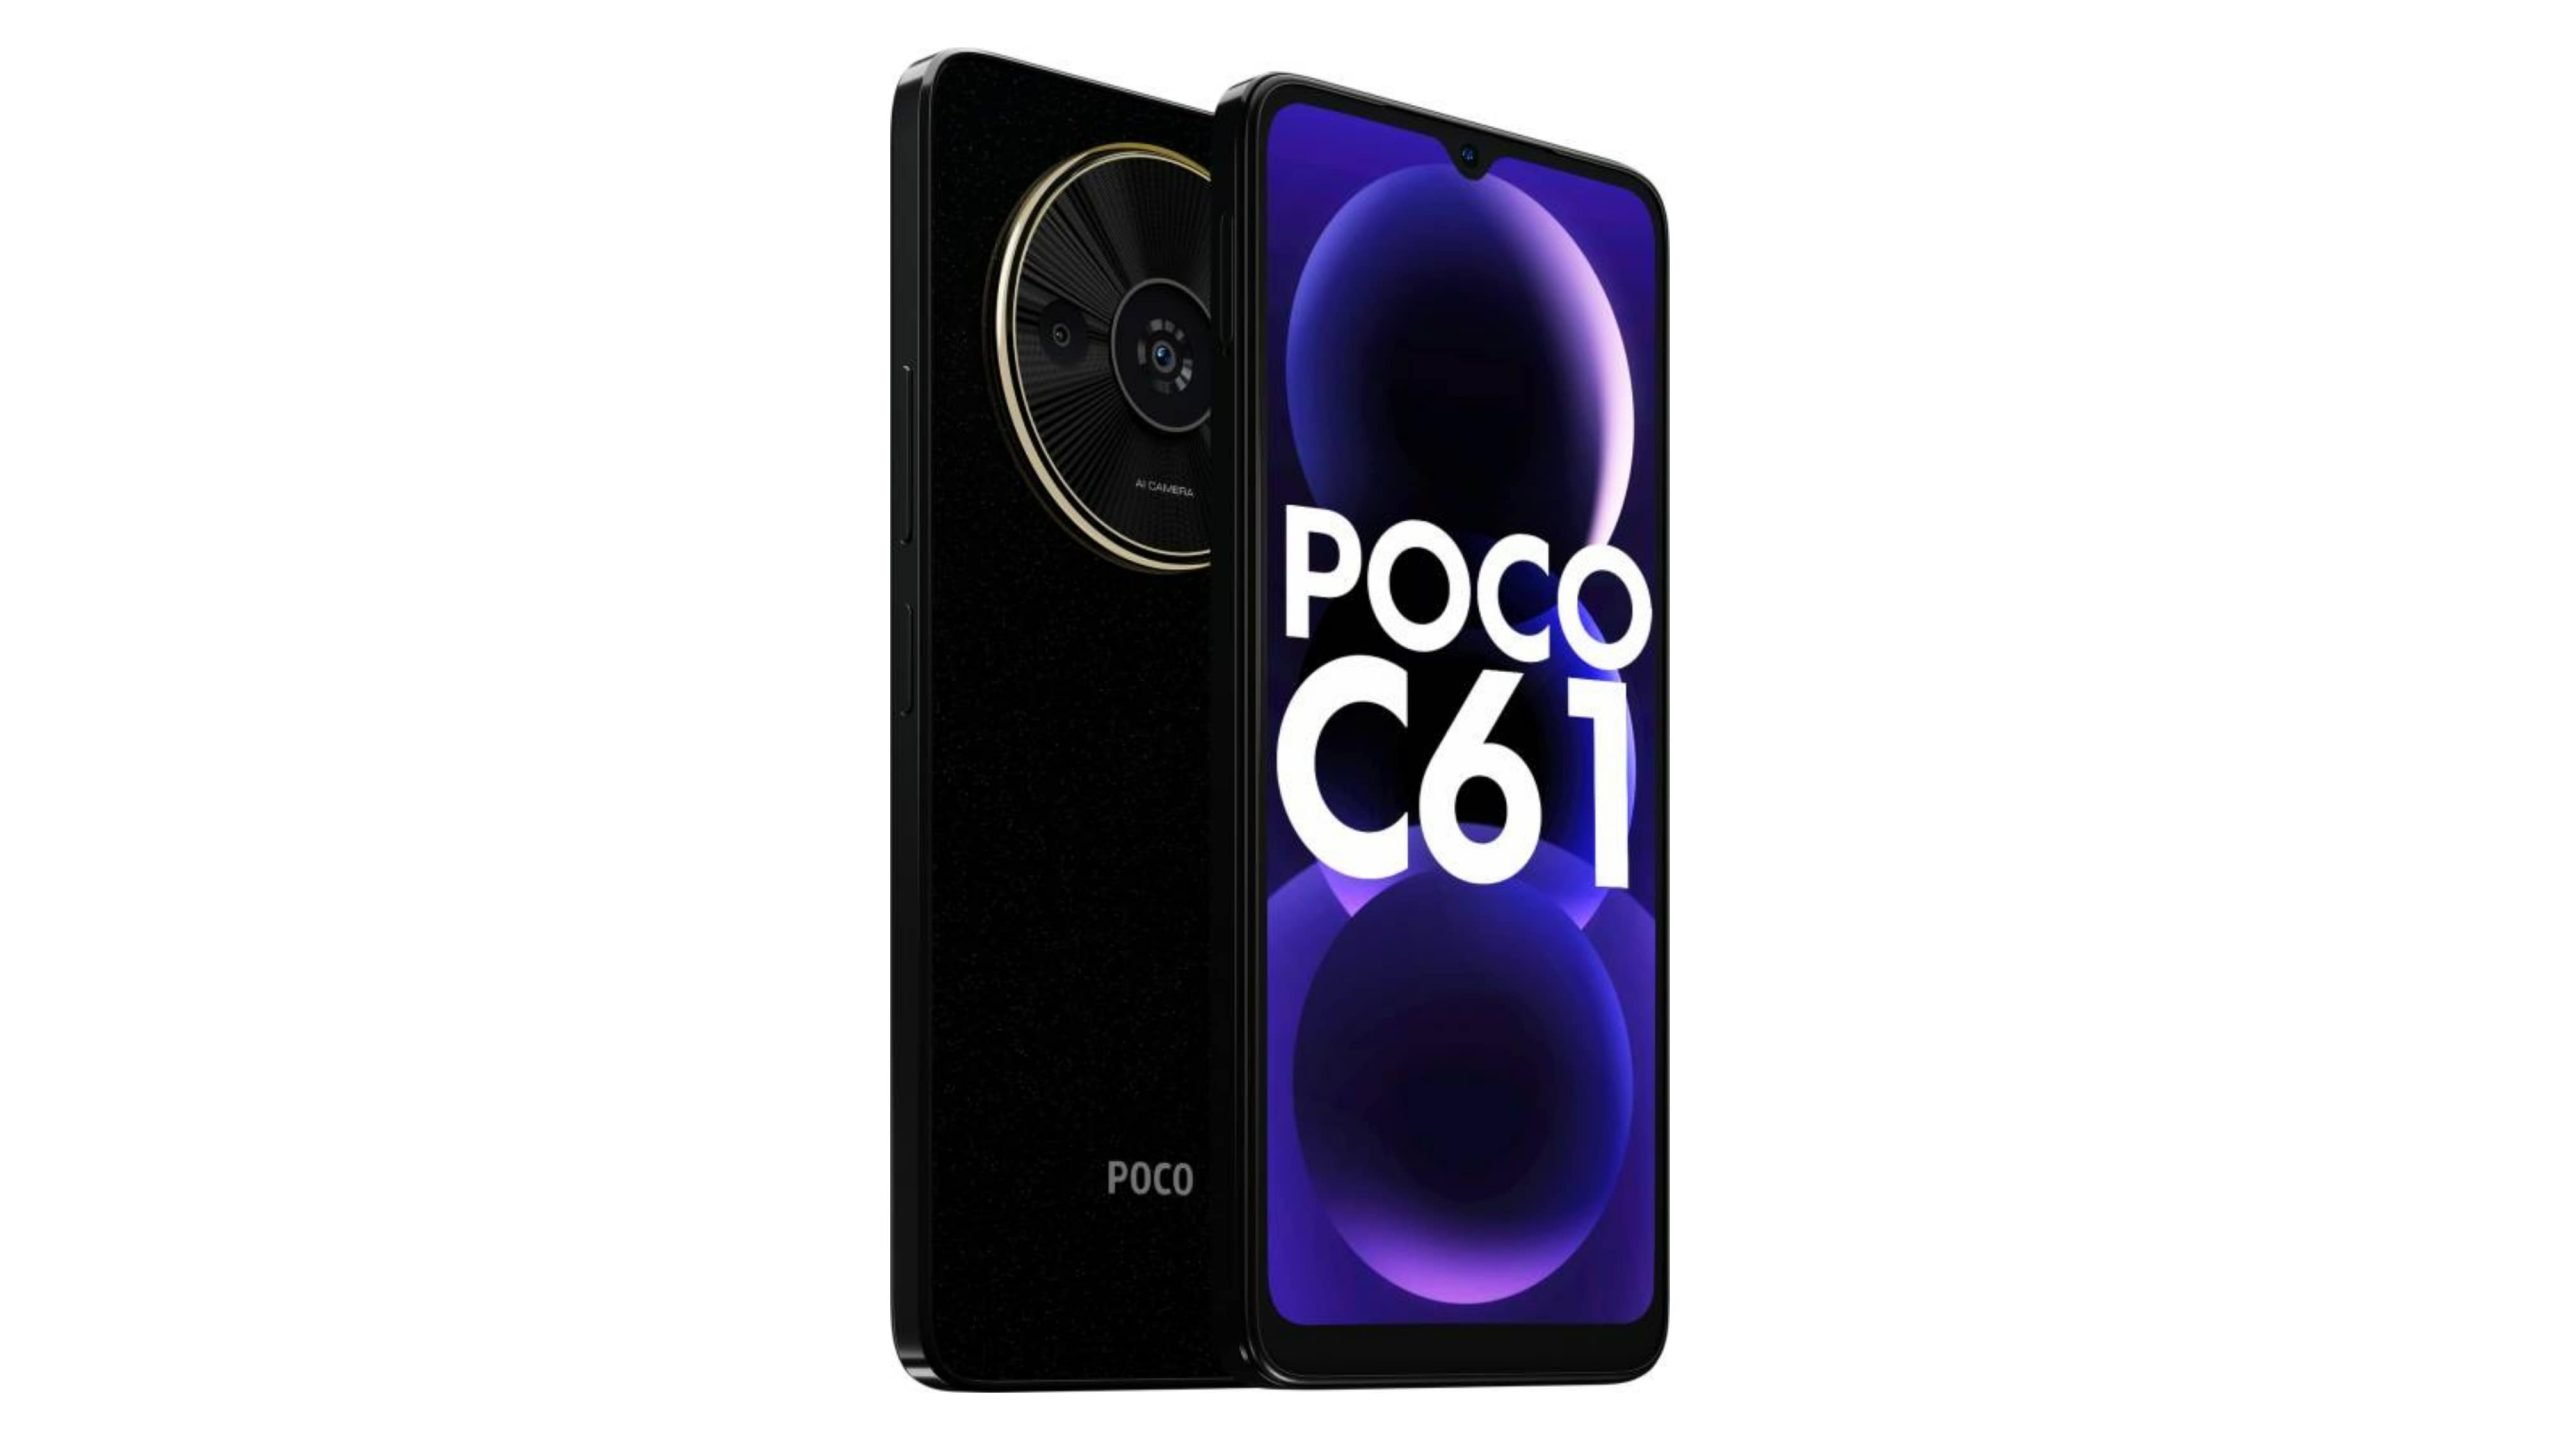 POCO C61 on Sale in India for ₹6,999! Features 6.71″
Display, Helio G36 processor &amp; 5,000mAh battery